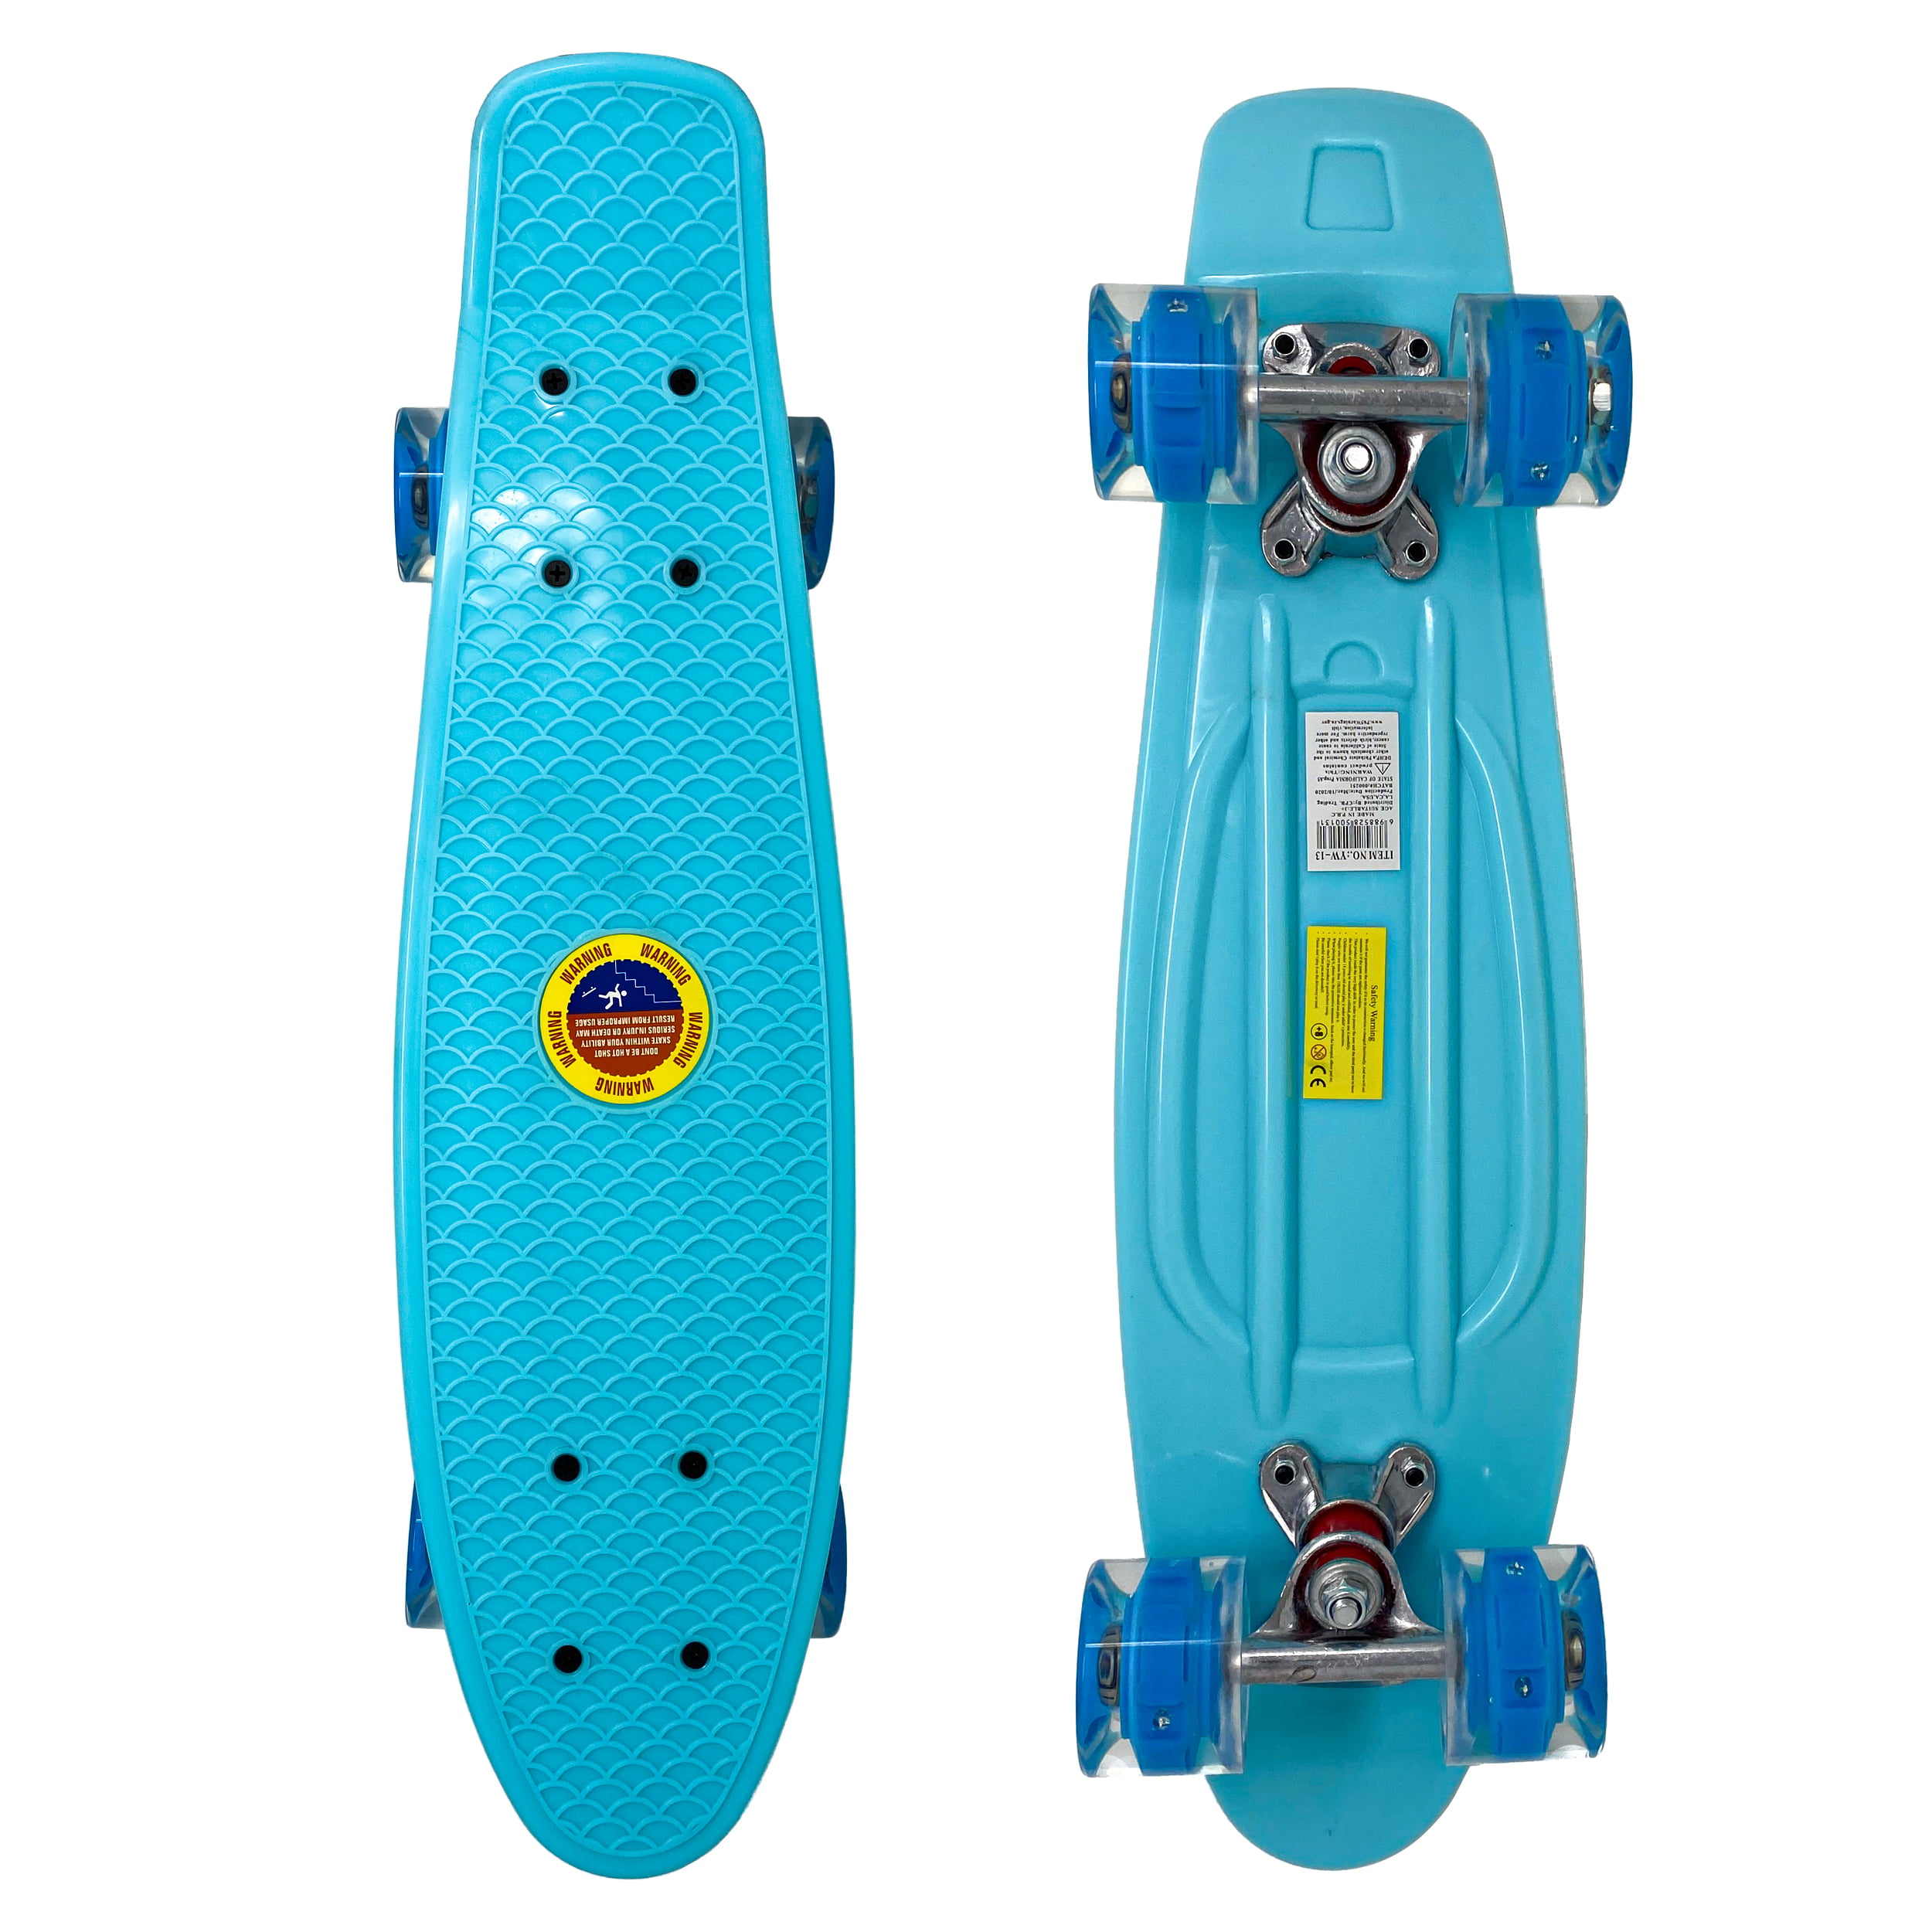 Hiboy 22 Complete Skateboards Mini Cruiser with Colorful LED Light Up Wheels for Kids Beginners Youths 